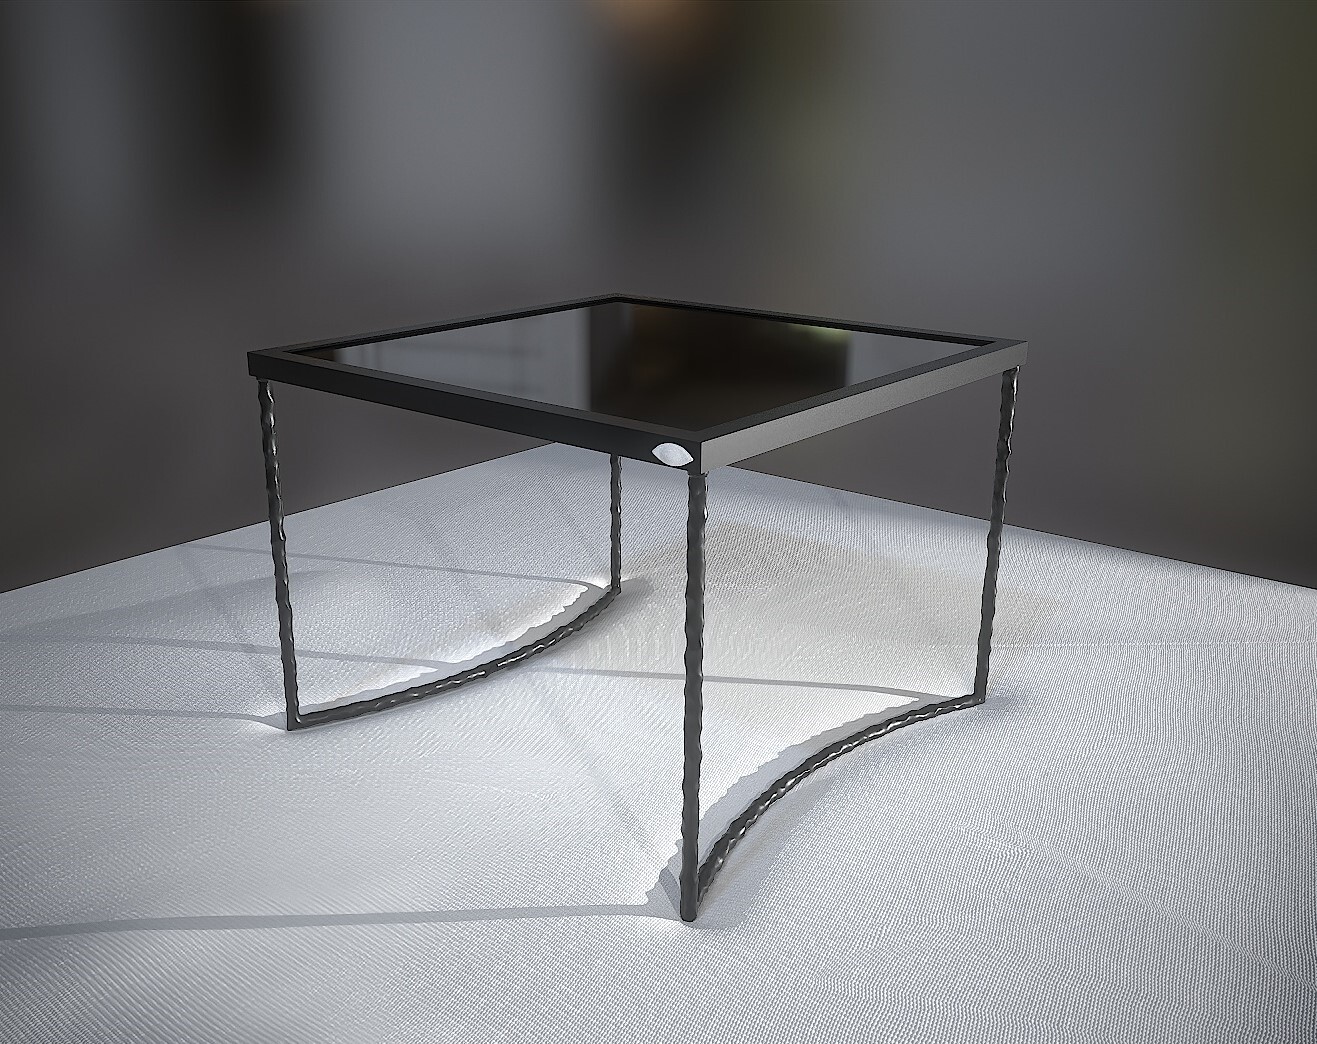 Shoulrhan/ Forged steel coffee table / Pascale BennaÏm